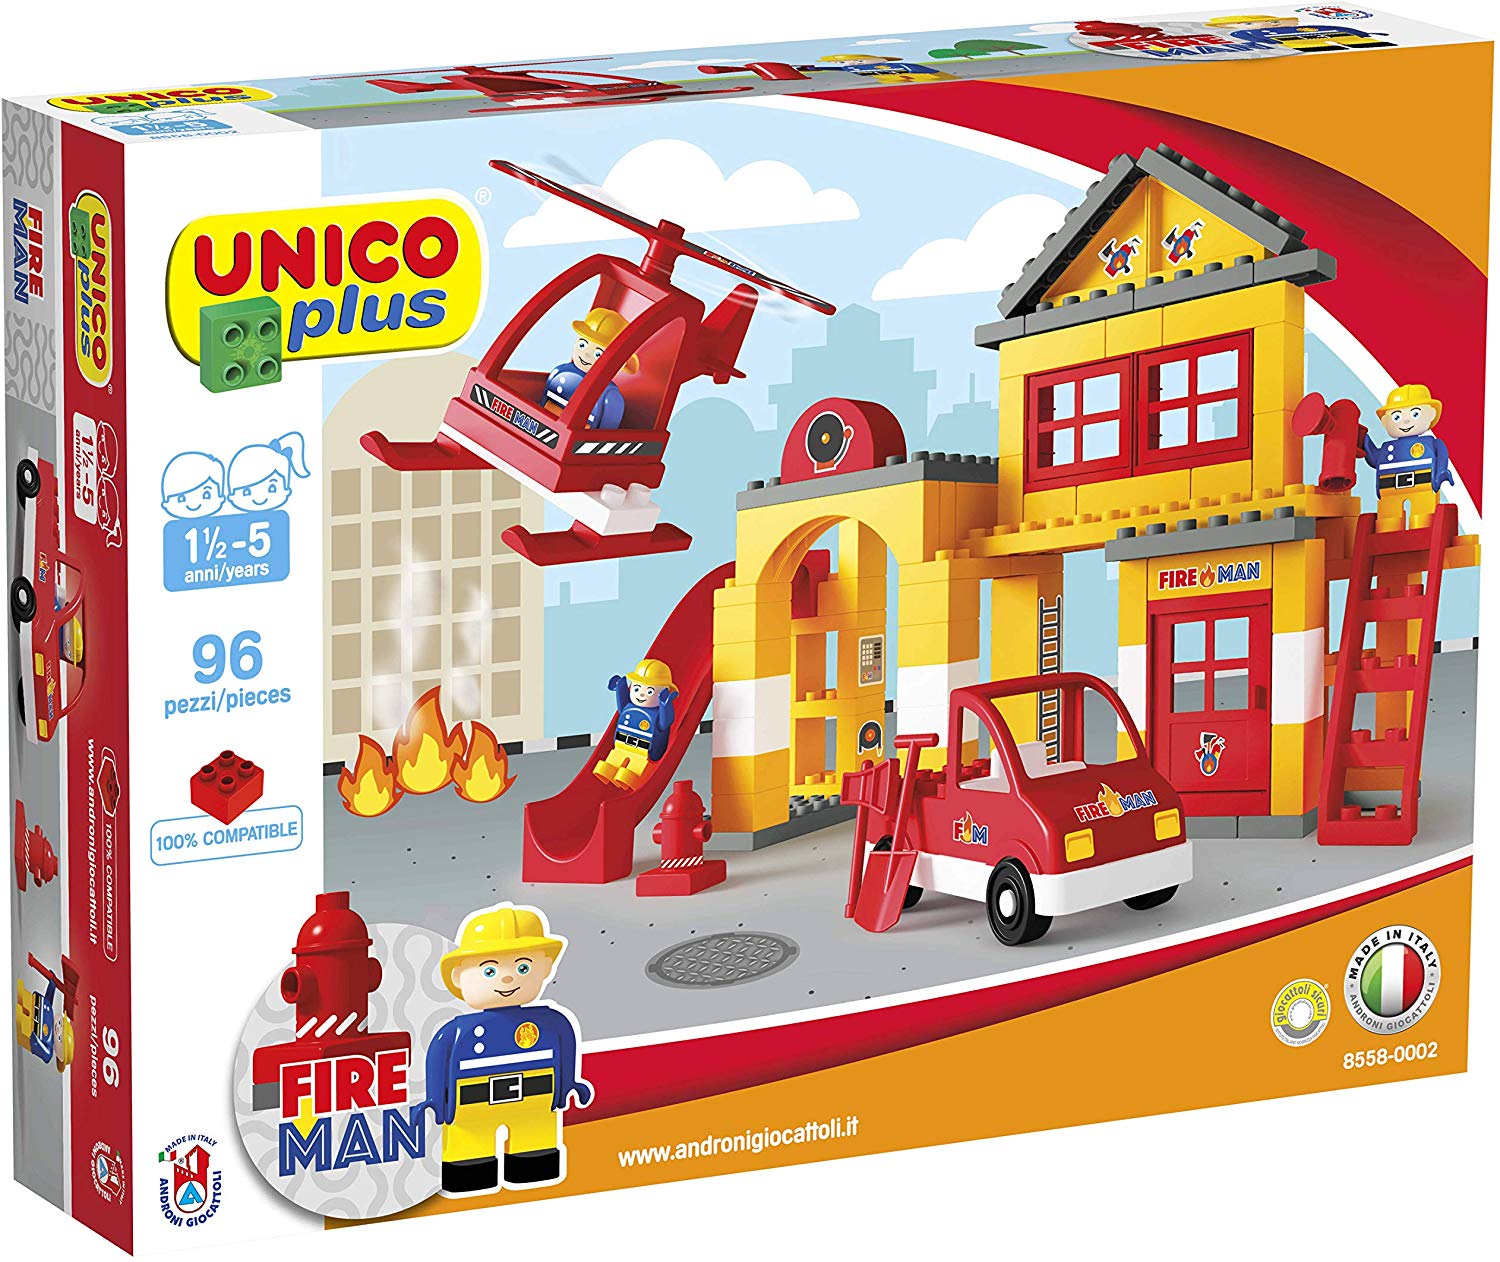 Unico Plus Fire Station Building Blocks Helicopter Fire Engine